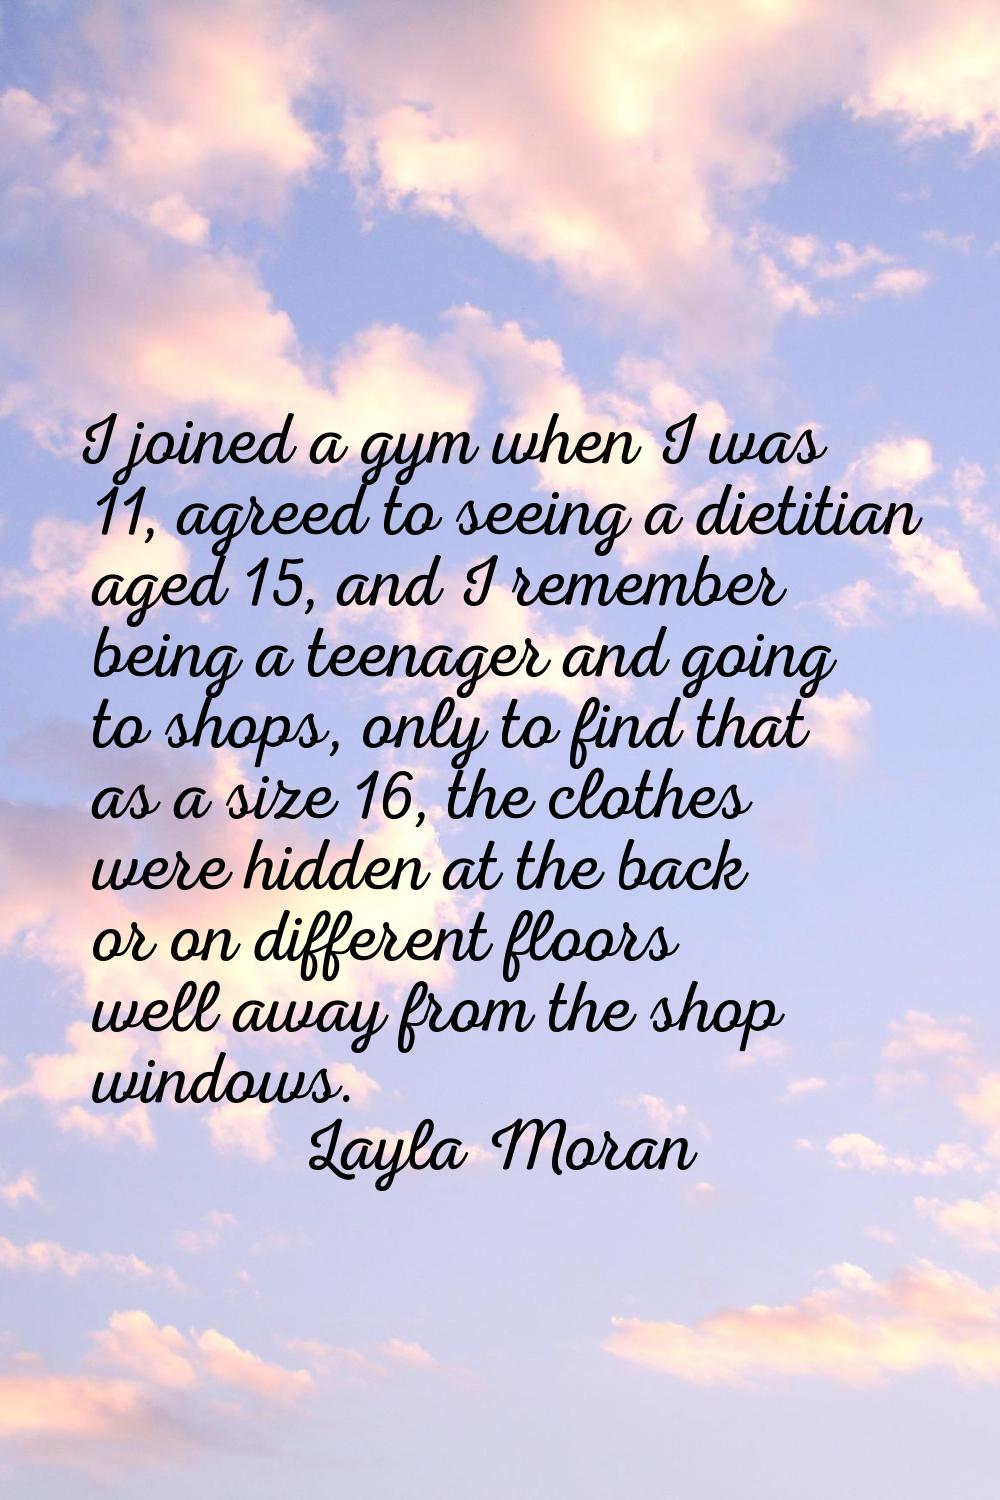 I joined a gym when I was 11, agreed to seeing a dietitian aged 15, and I remember being a teenager